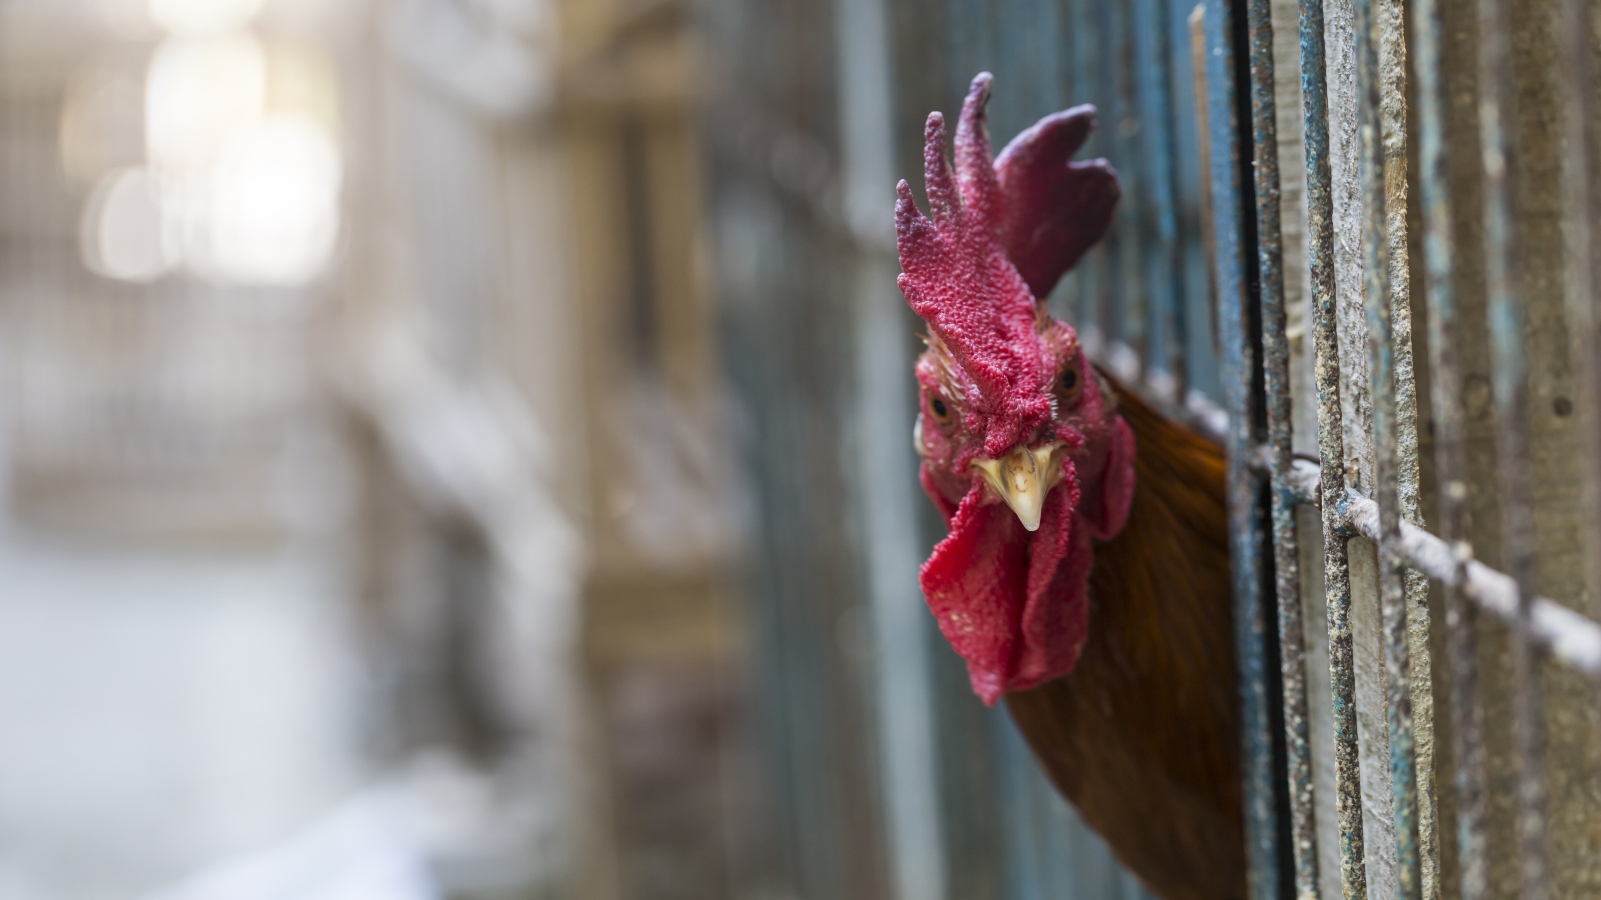 First ever case of H5N1 bird flu reported in the UK